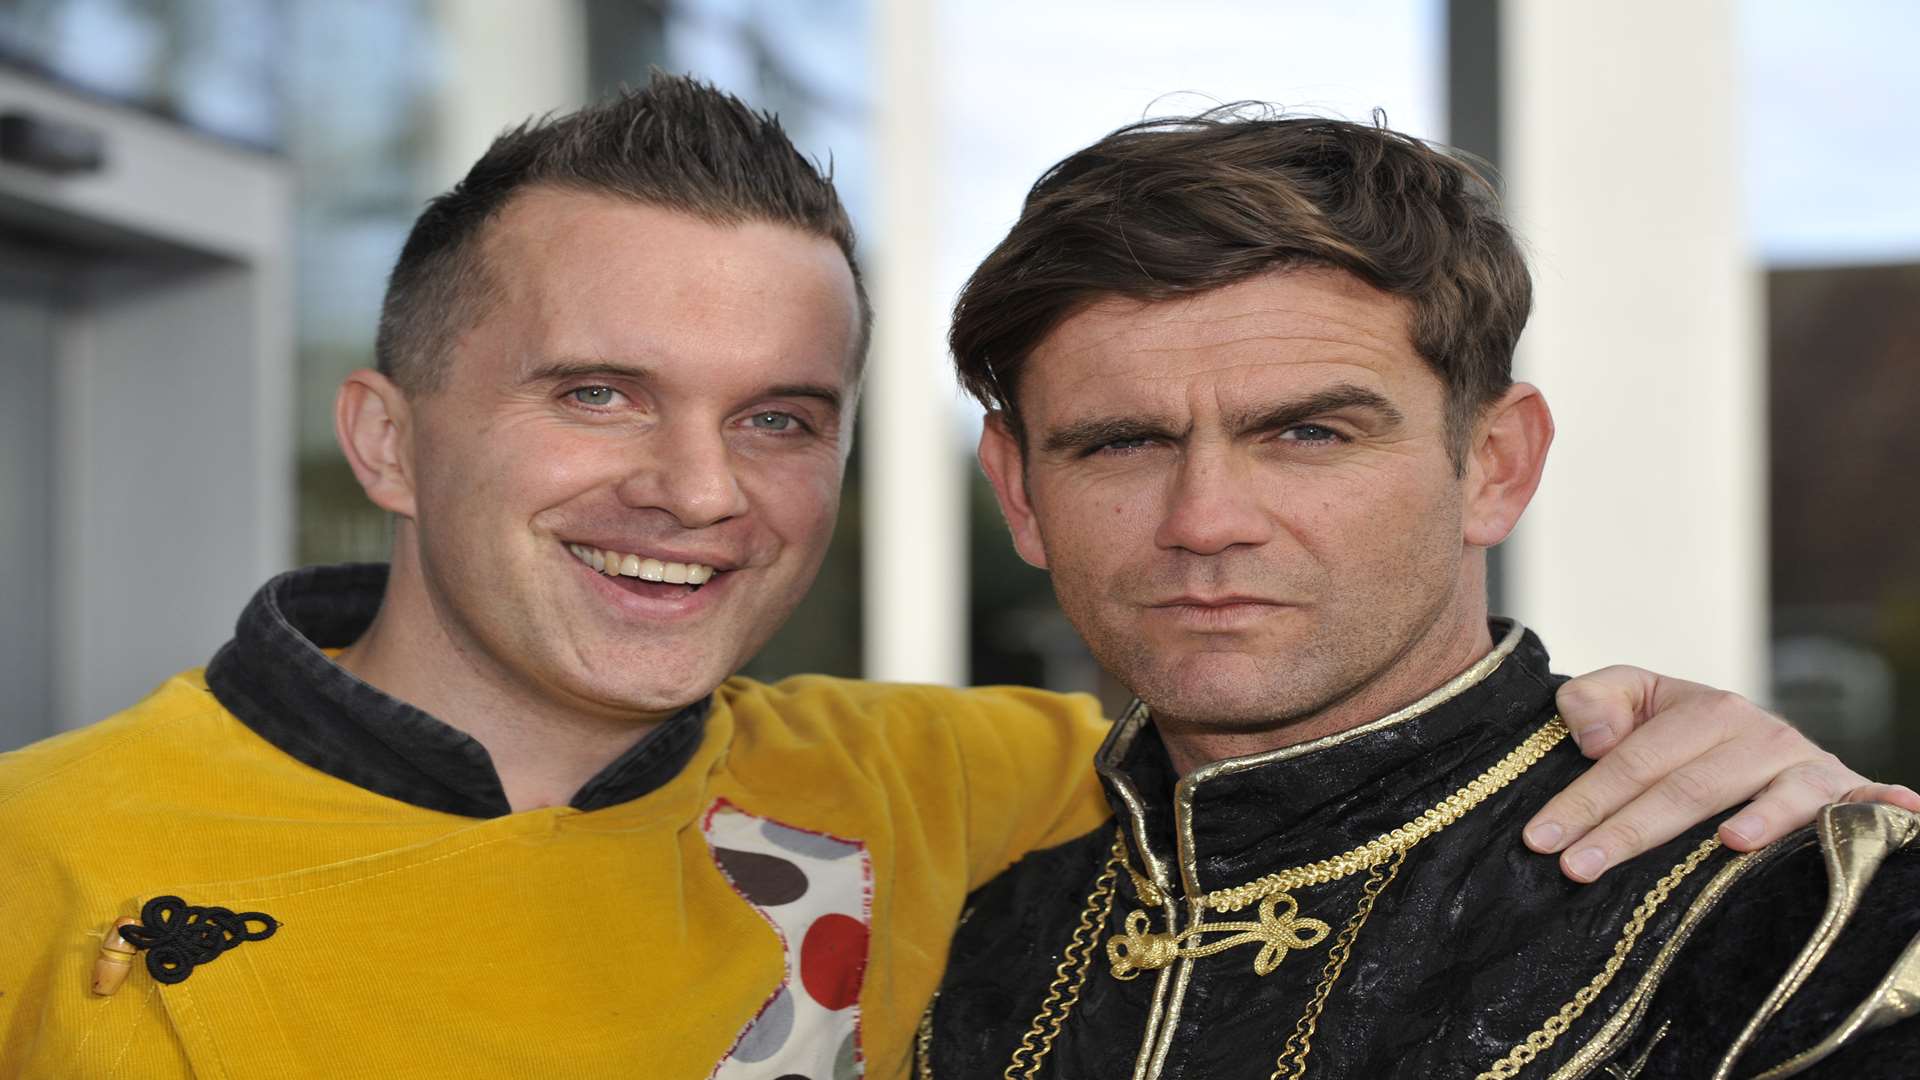 CBeebies' Mister Maker aka Phil Gallagher (left), who is starring in Aladdin at the Marlowe Theatre with EastEnders' Scott Maslen, has become Honorary Patron of the KM Charity Team